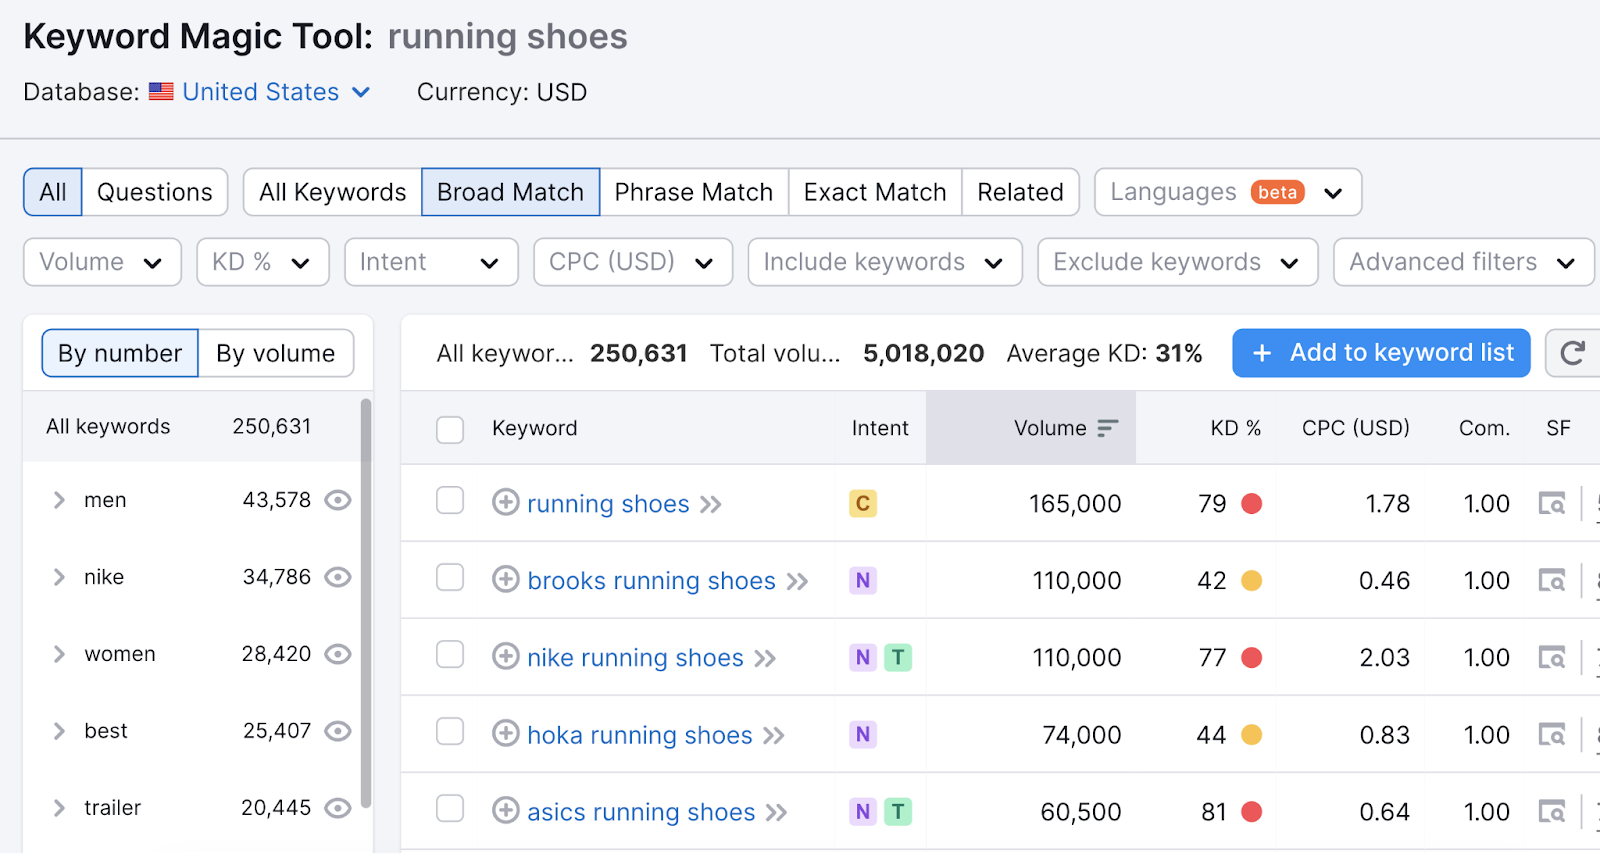 Keyword Magic Tool results for running shoes